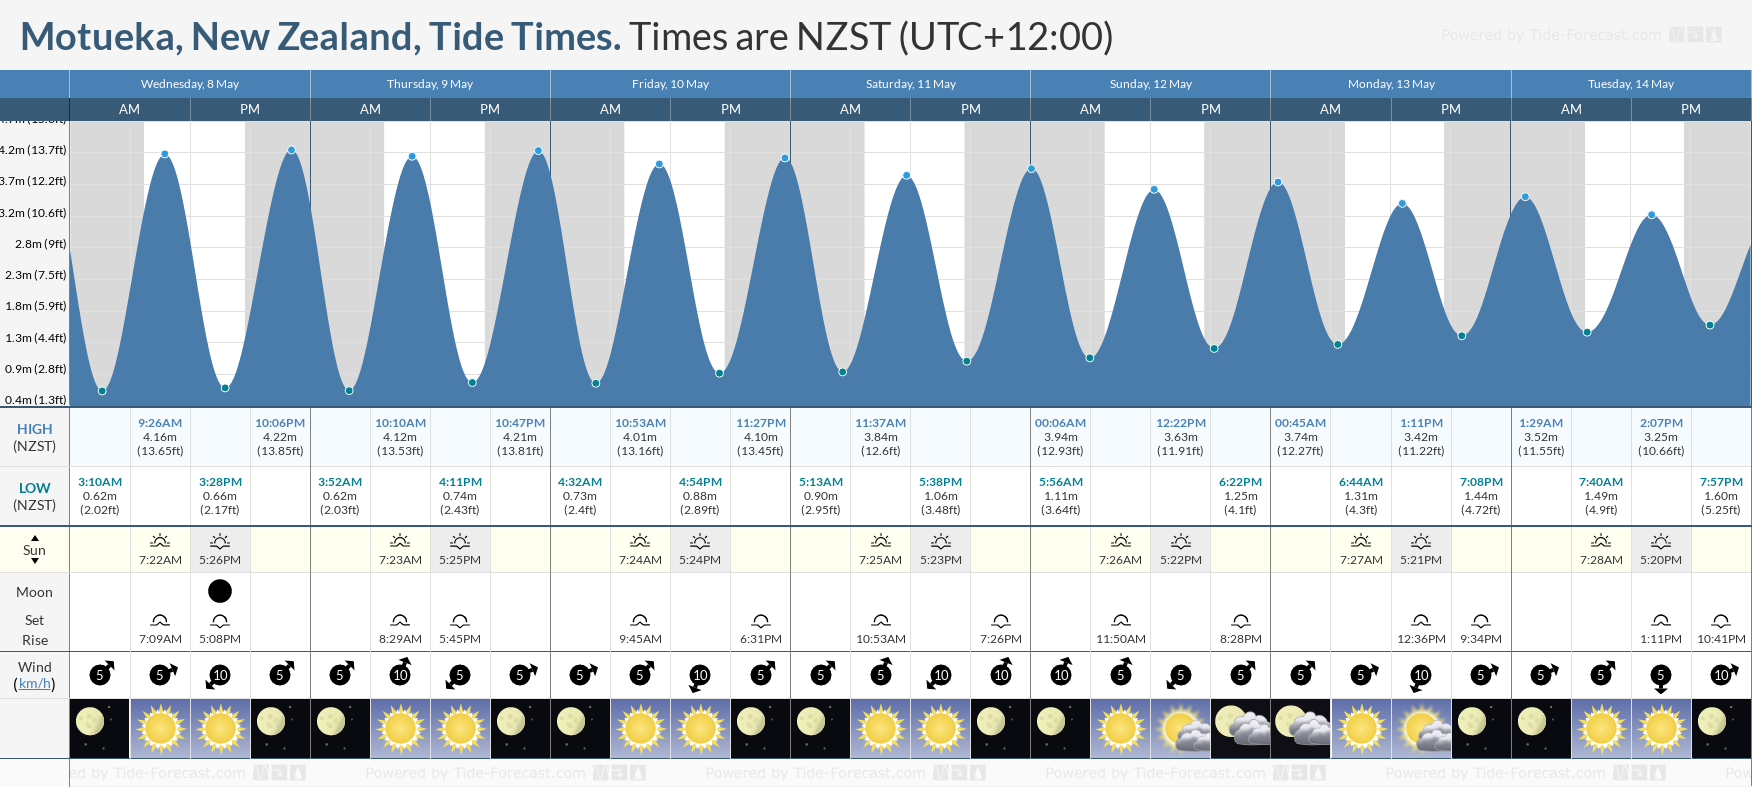 Motueka, New Zealand Tide Chart including high and low tide times for the next 7 days